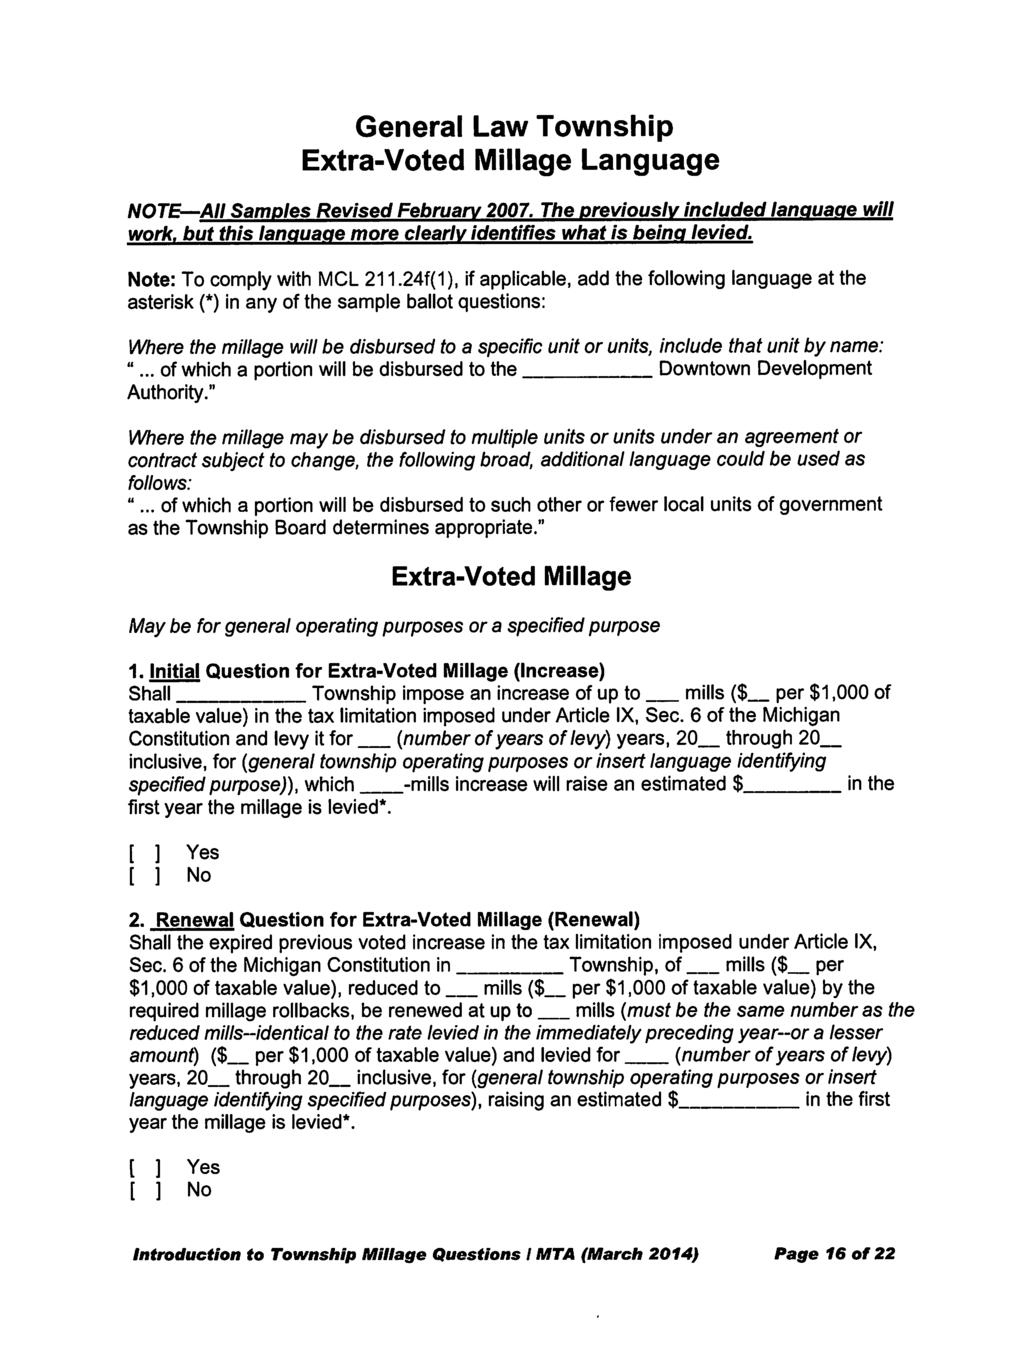 General Law Township Extra-Voted Millage Language NOTE All Samples Revised February 2007. The previously included language will work, but this language more clearly identifies what is being levied.